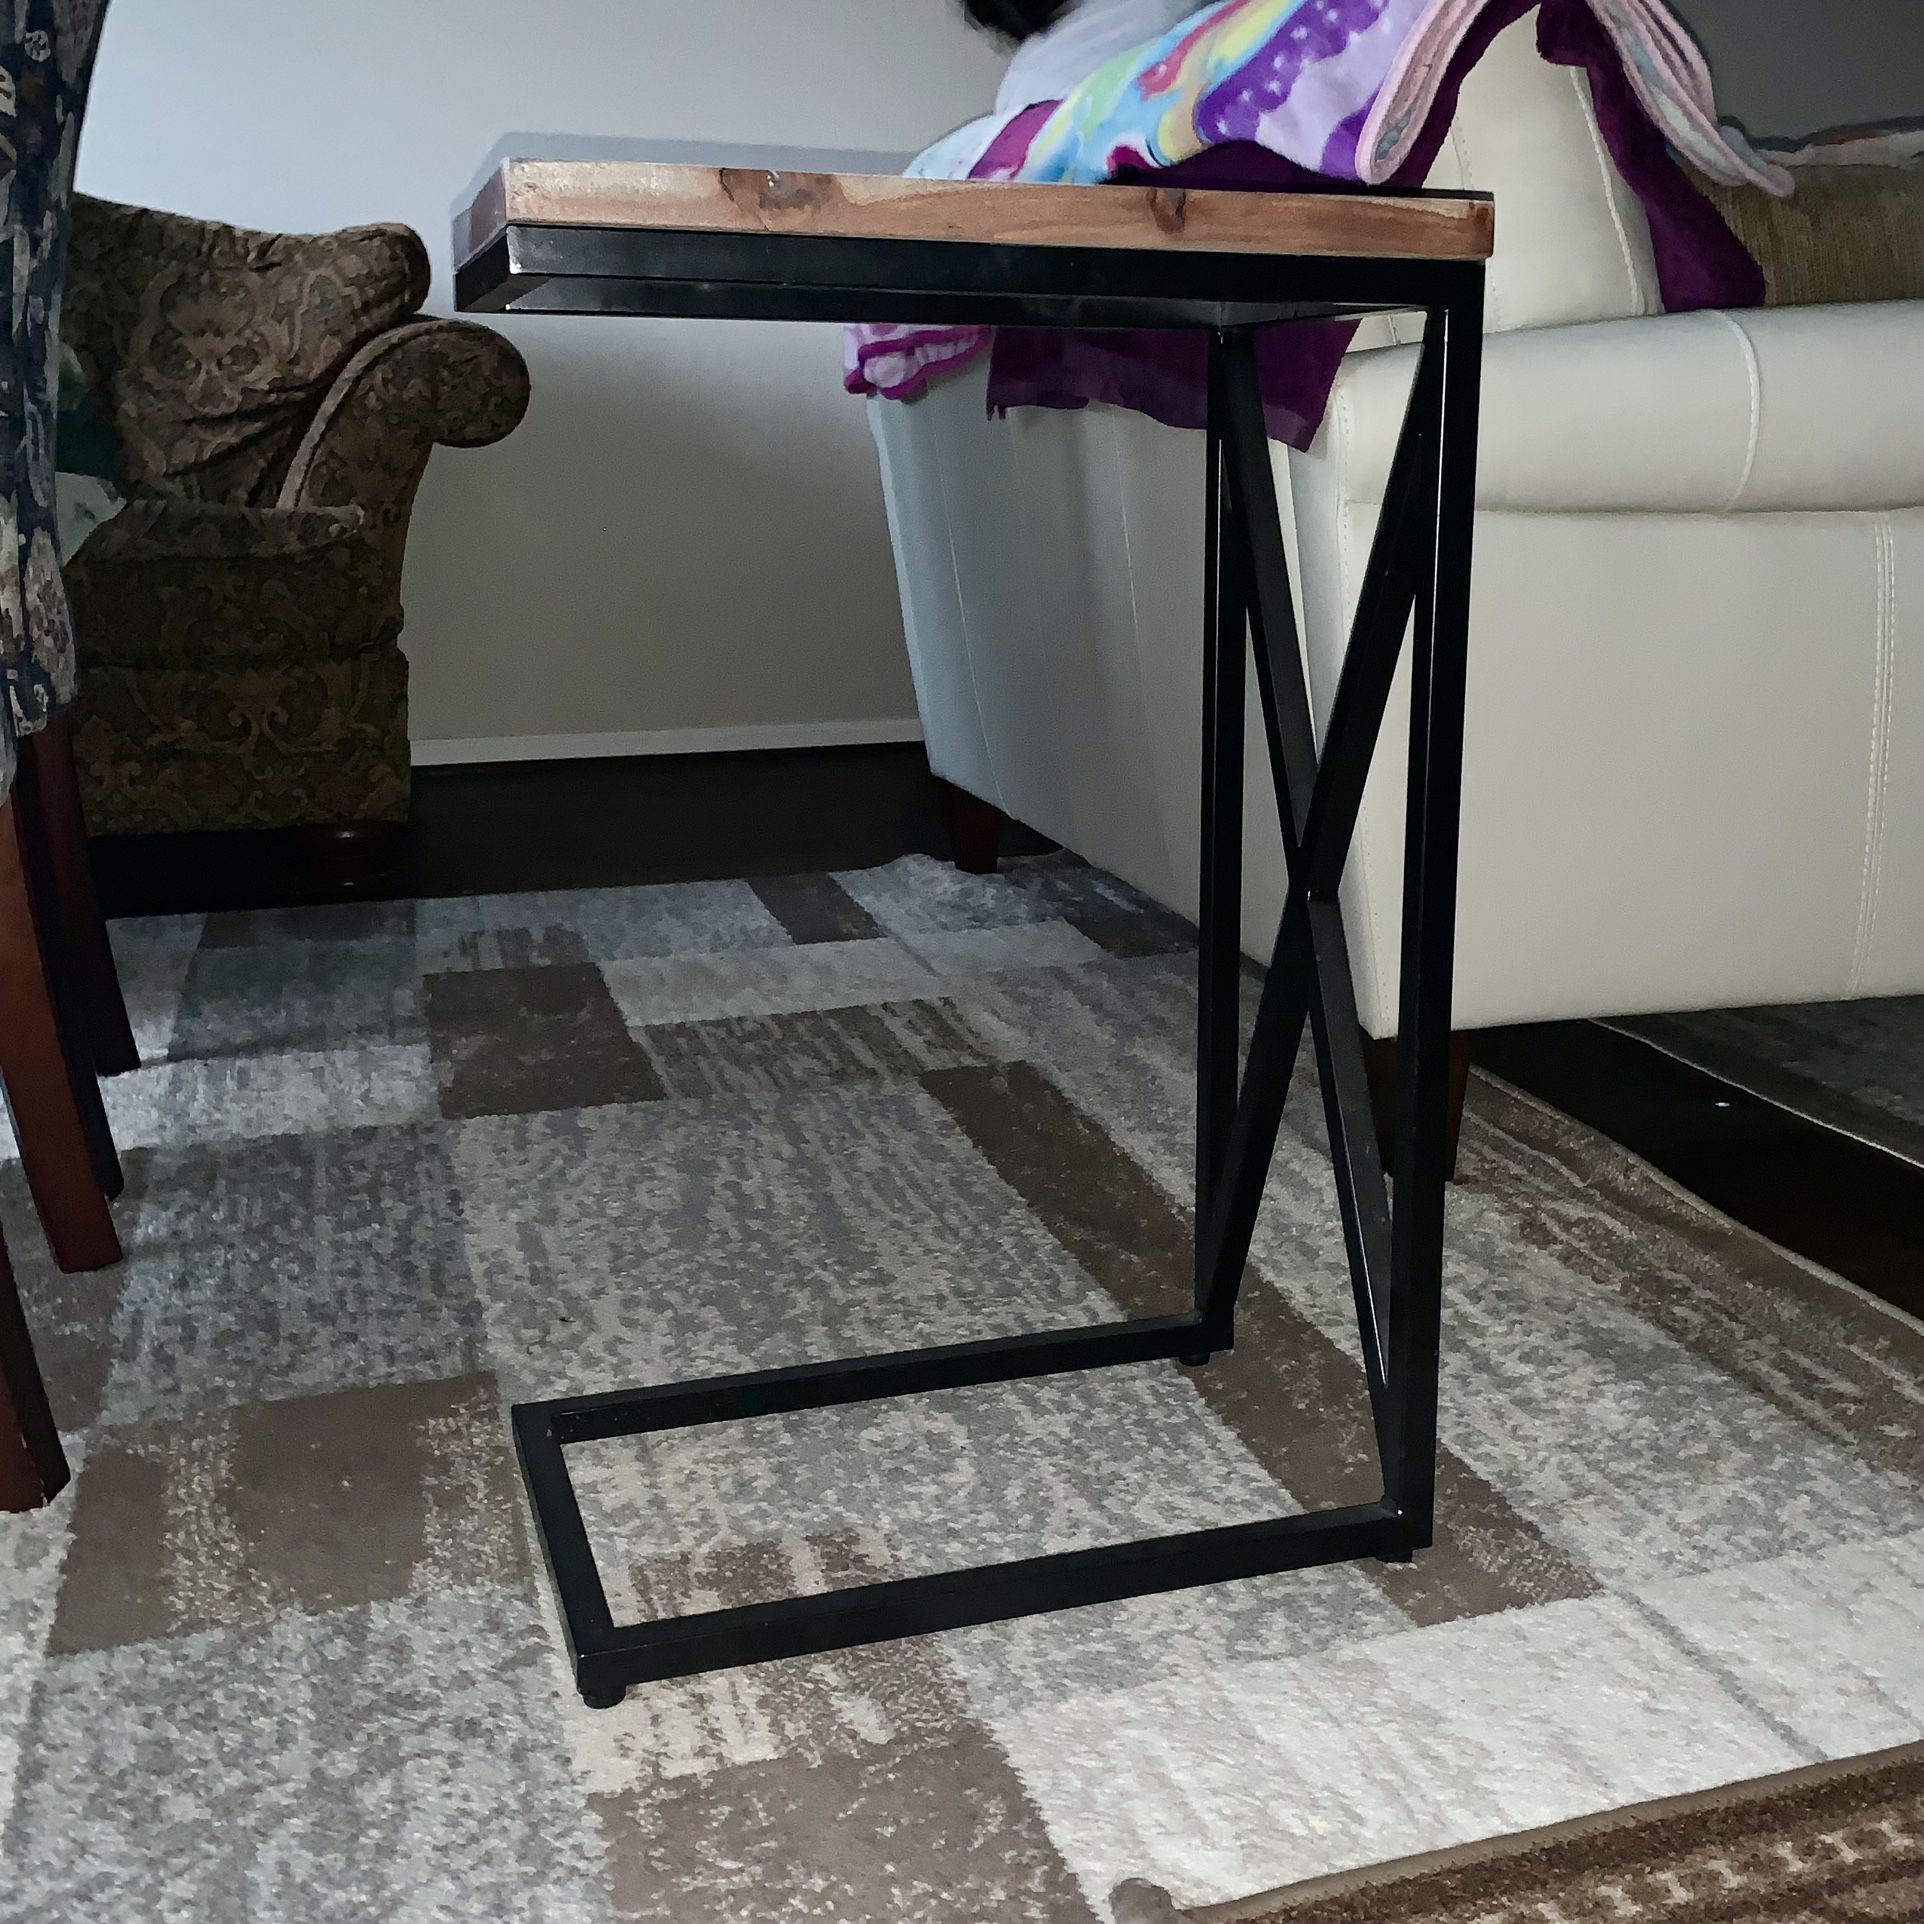 Tucson C End Tables From Breighton Home, $40 Each